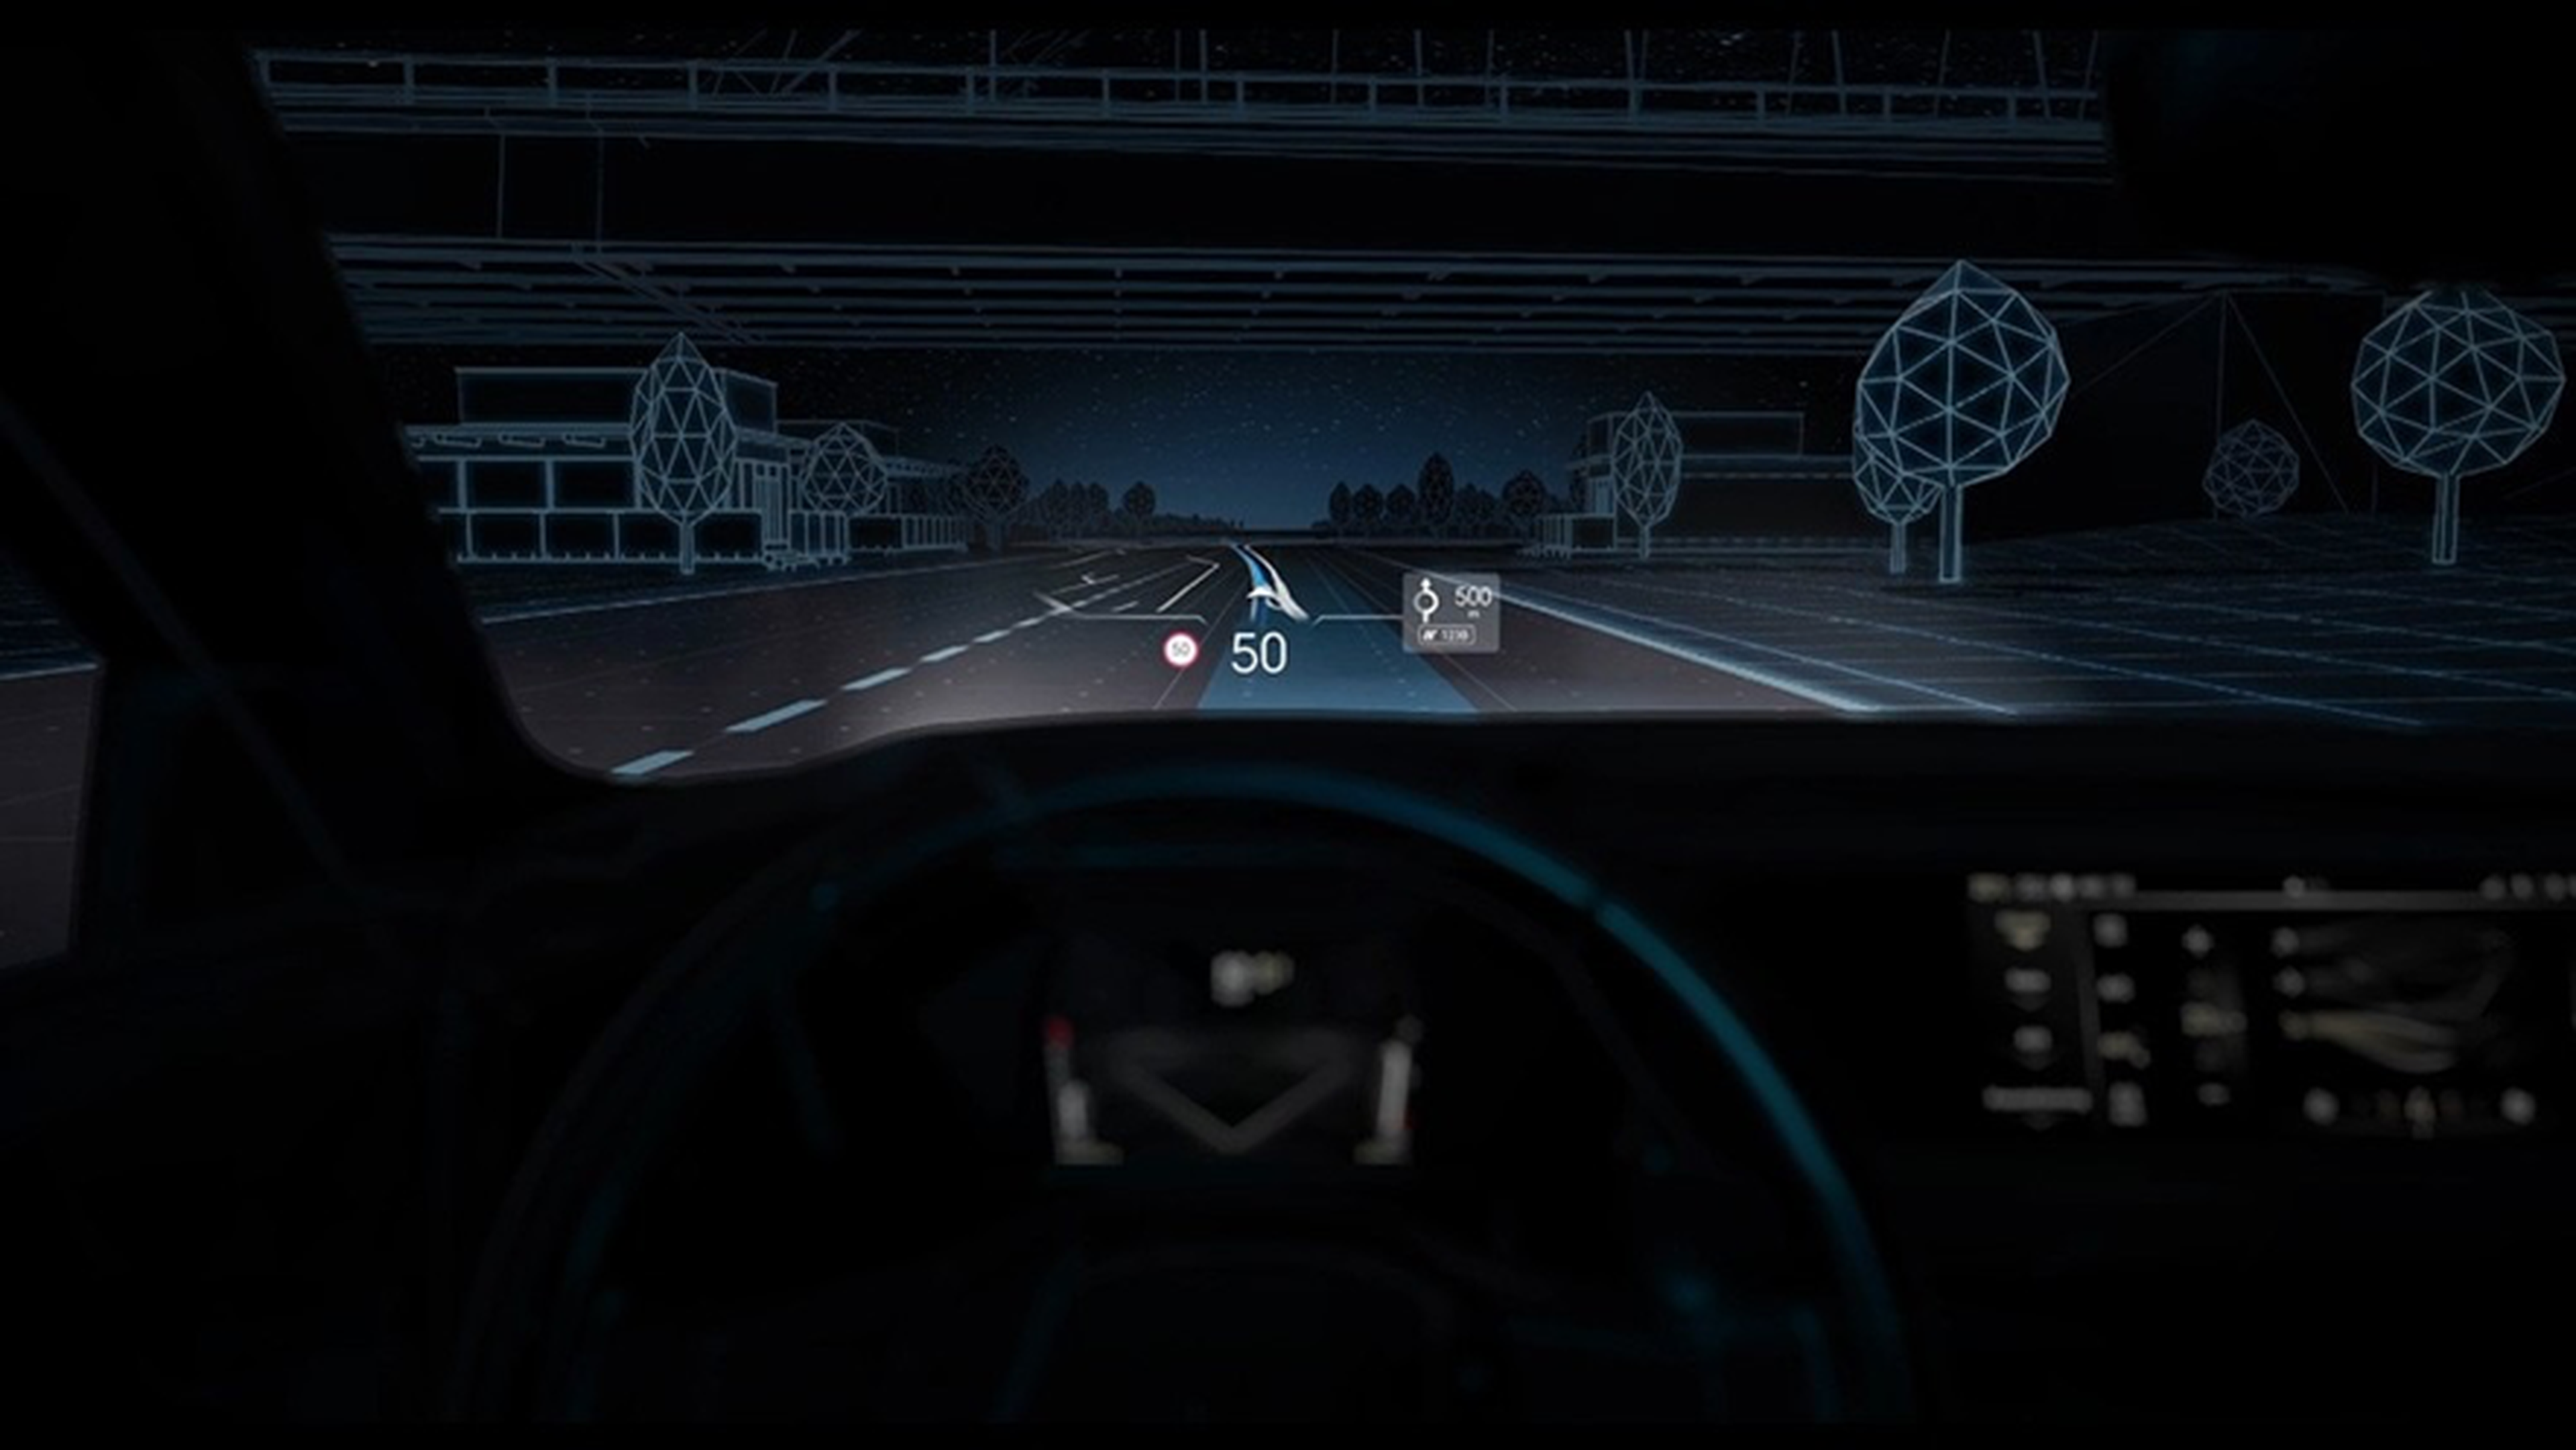 DS EXTENDED Head-Up Display